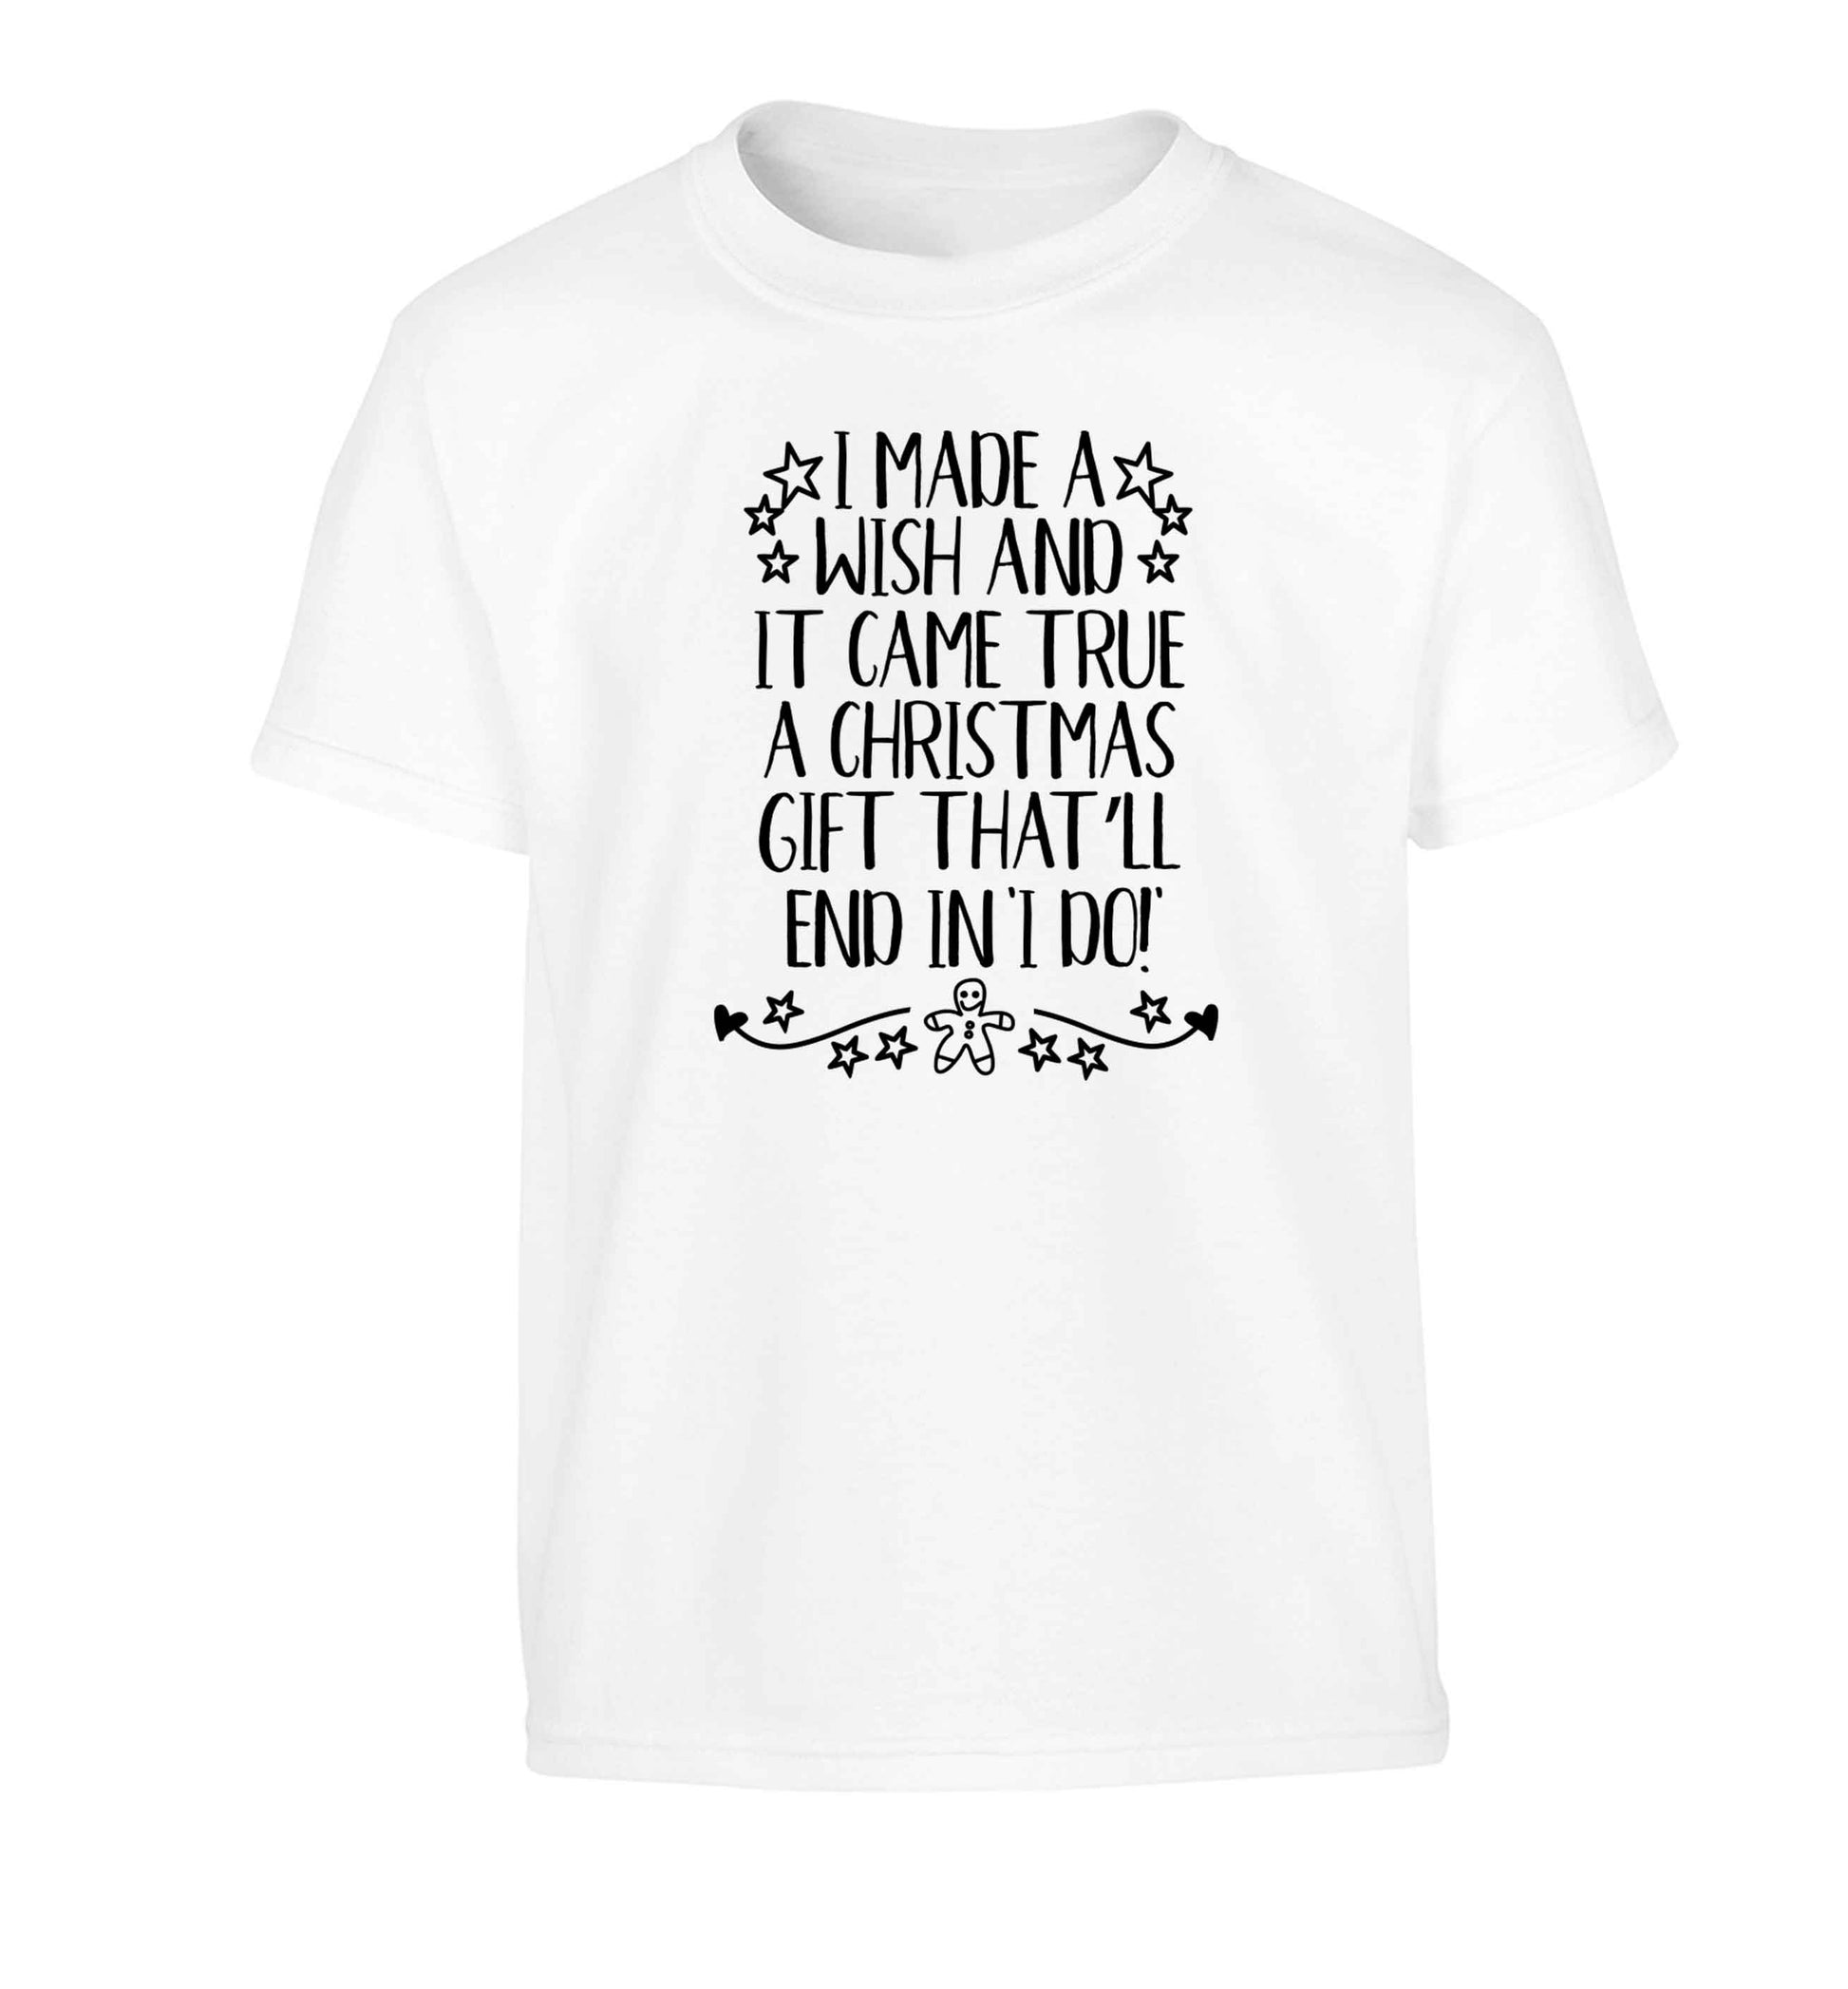 I made a wish and it came true a Christmas gift that'll end in 'I do' Children's white Tshirt 12-13 Years